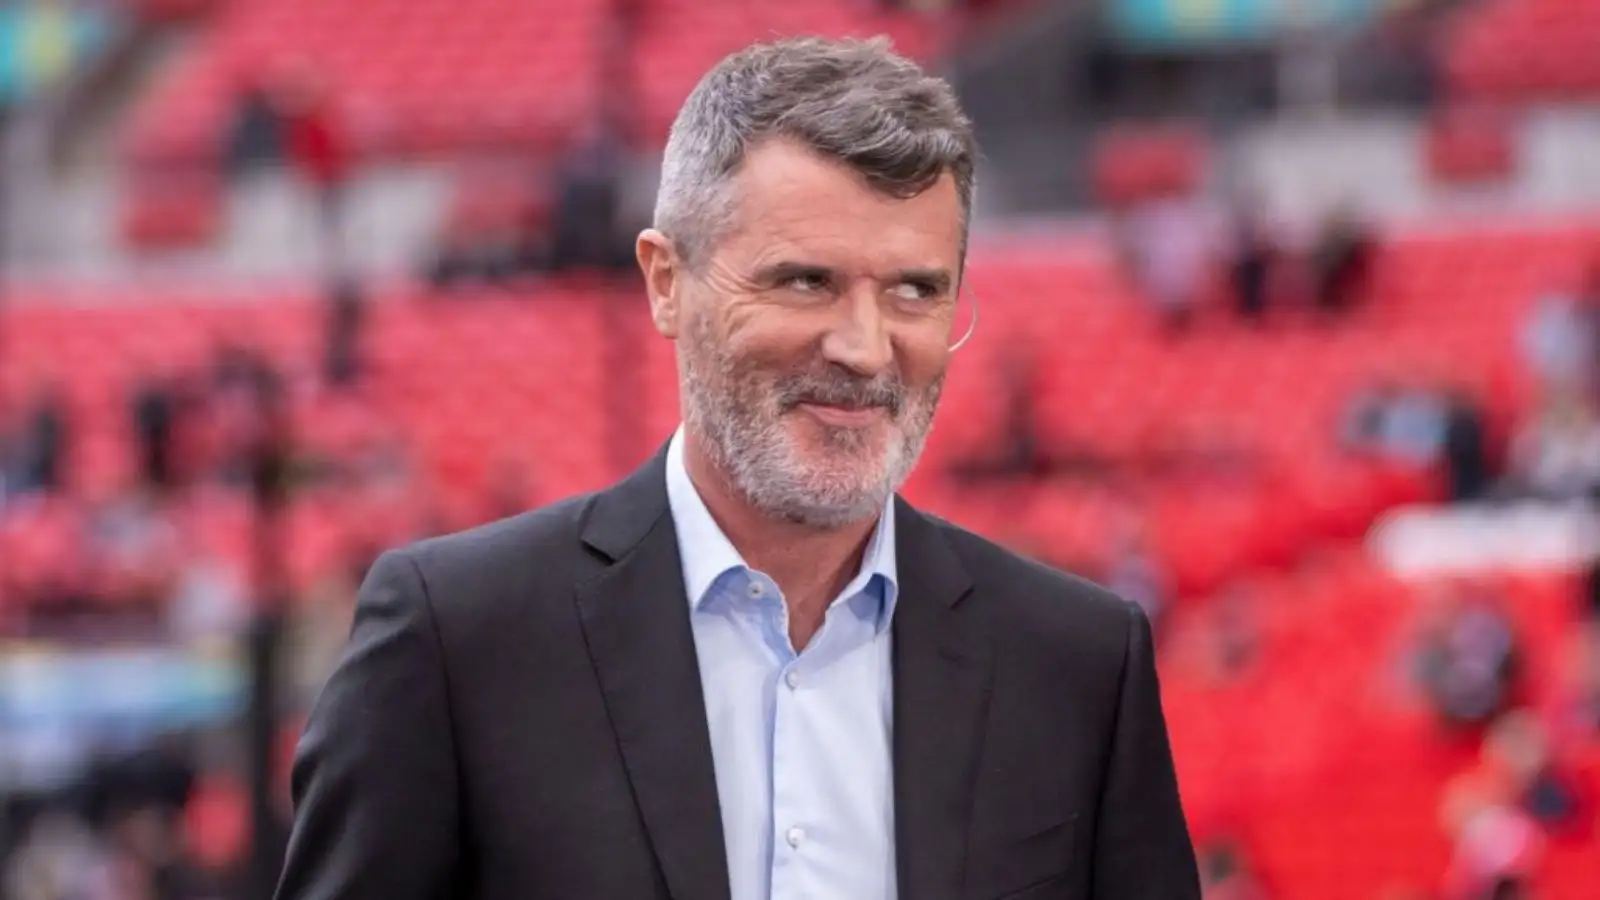 Keane hits back at ‘arrogant’ Van Dijk with cheeky Liverpool jibe – ‘One title in thirty-odd years’